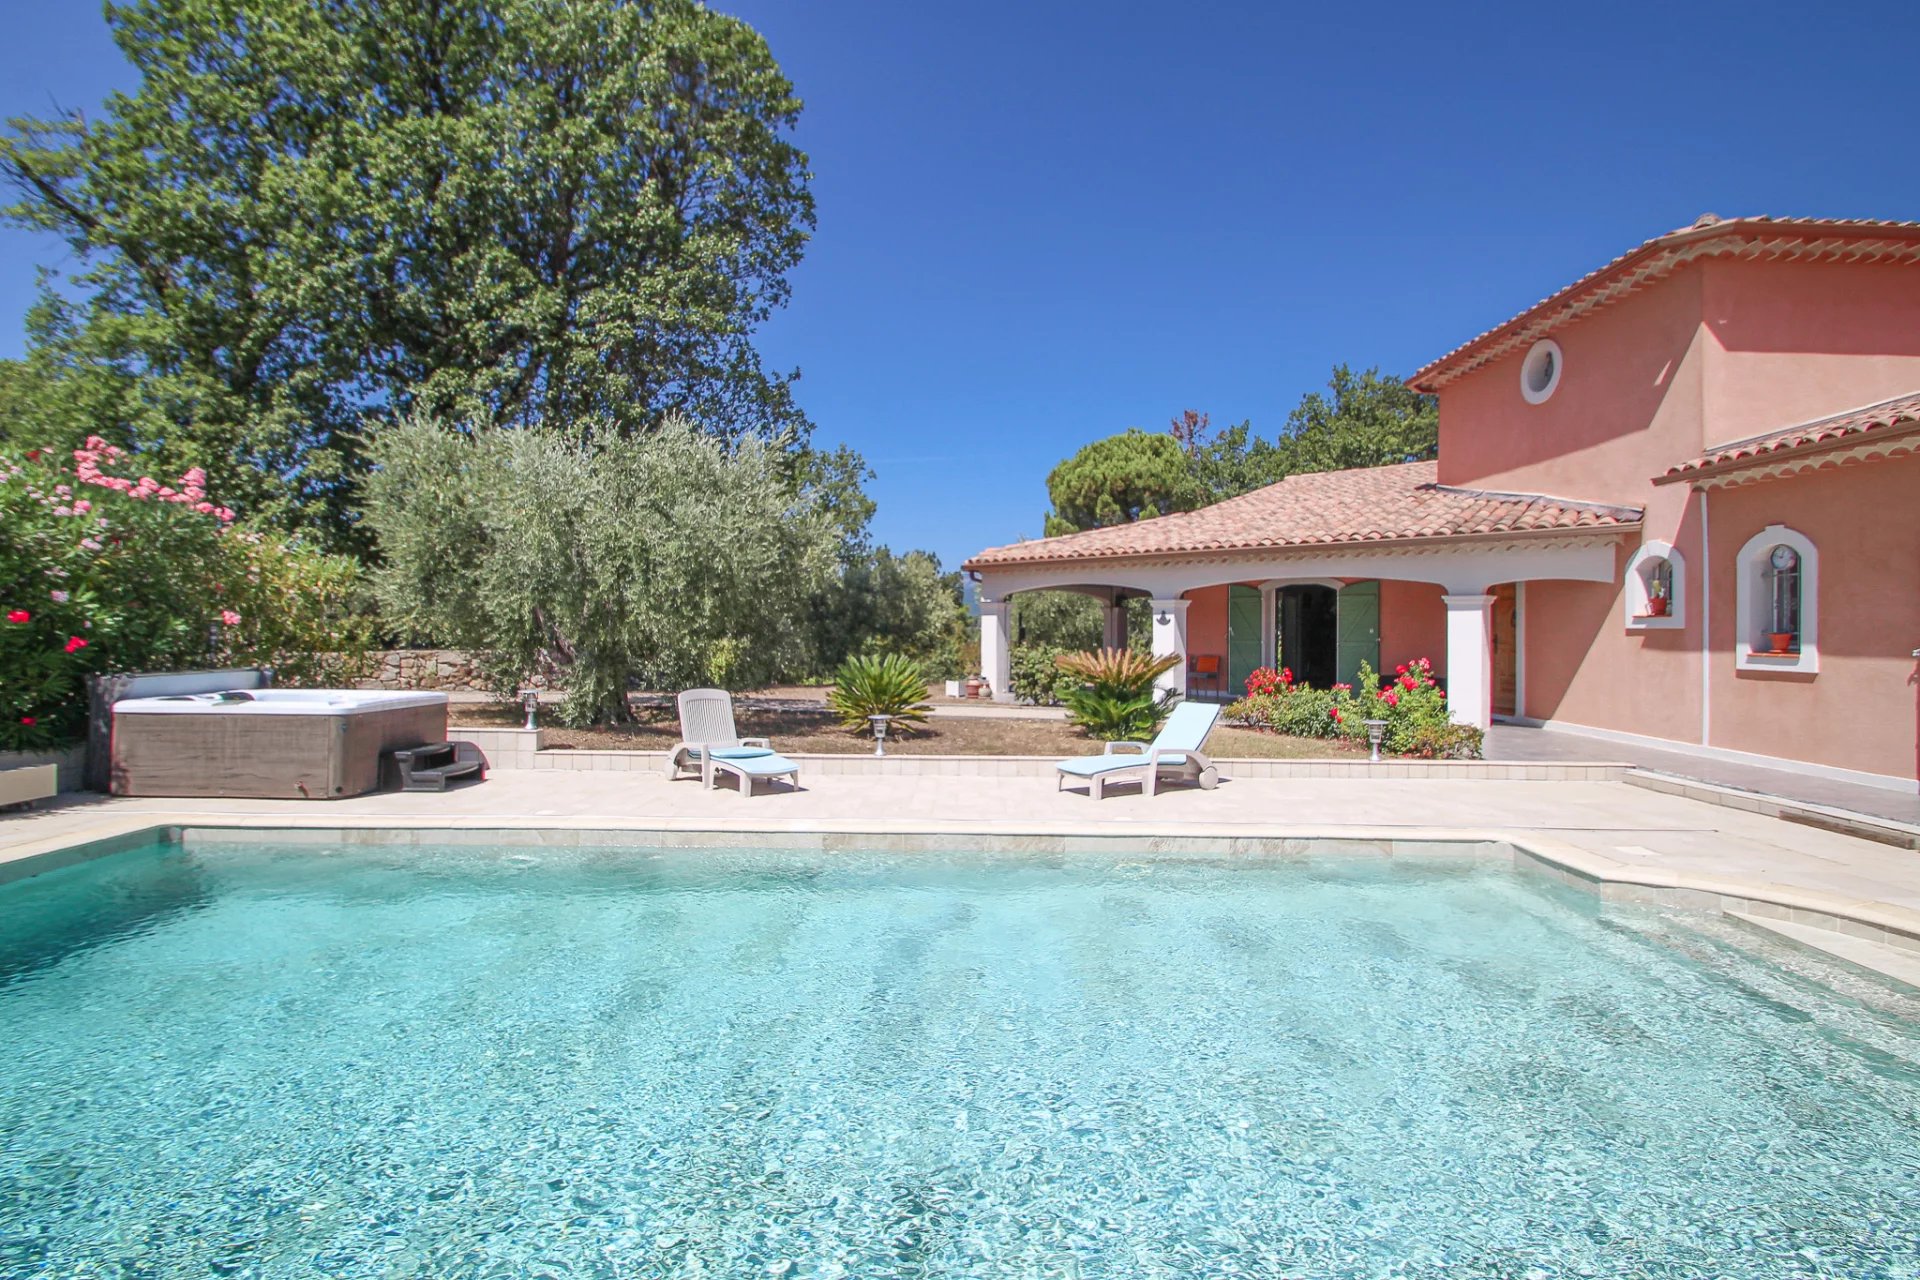 Spacious lovely and light villa in perfect condition with pool and large garage space